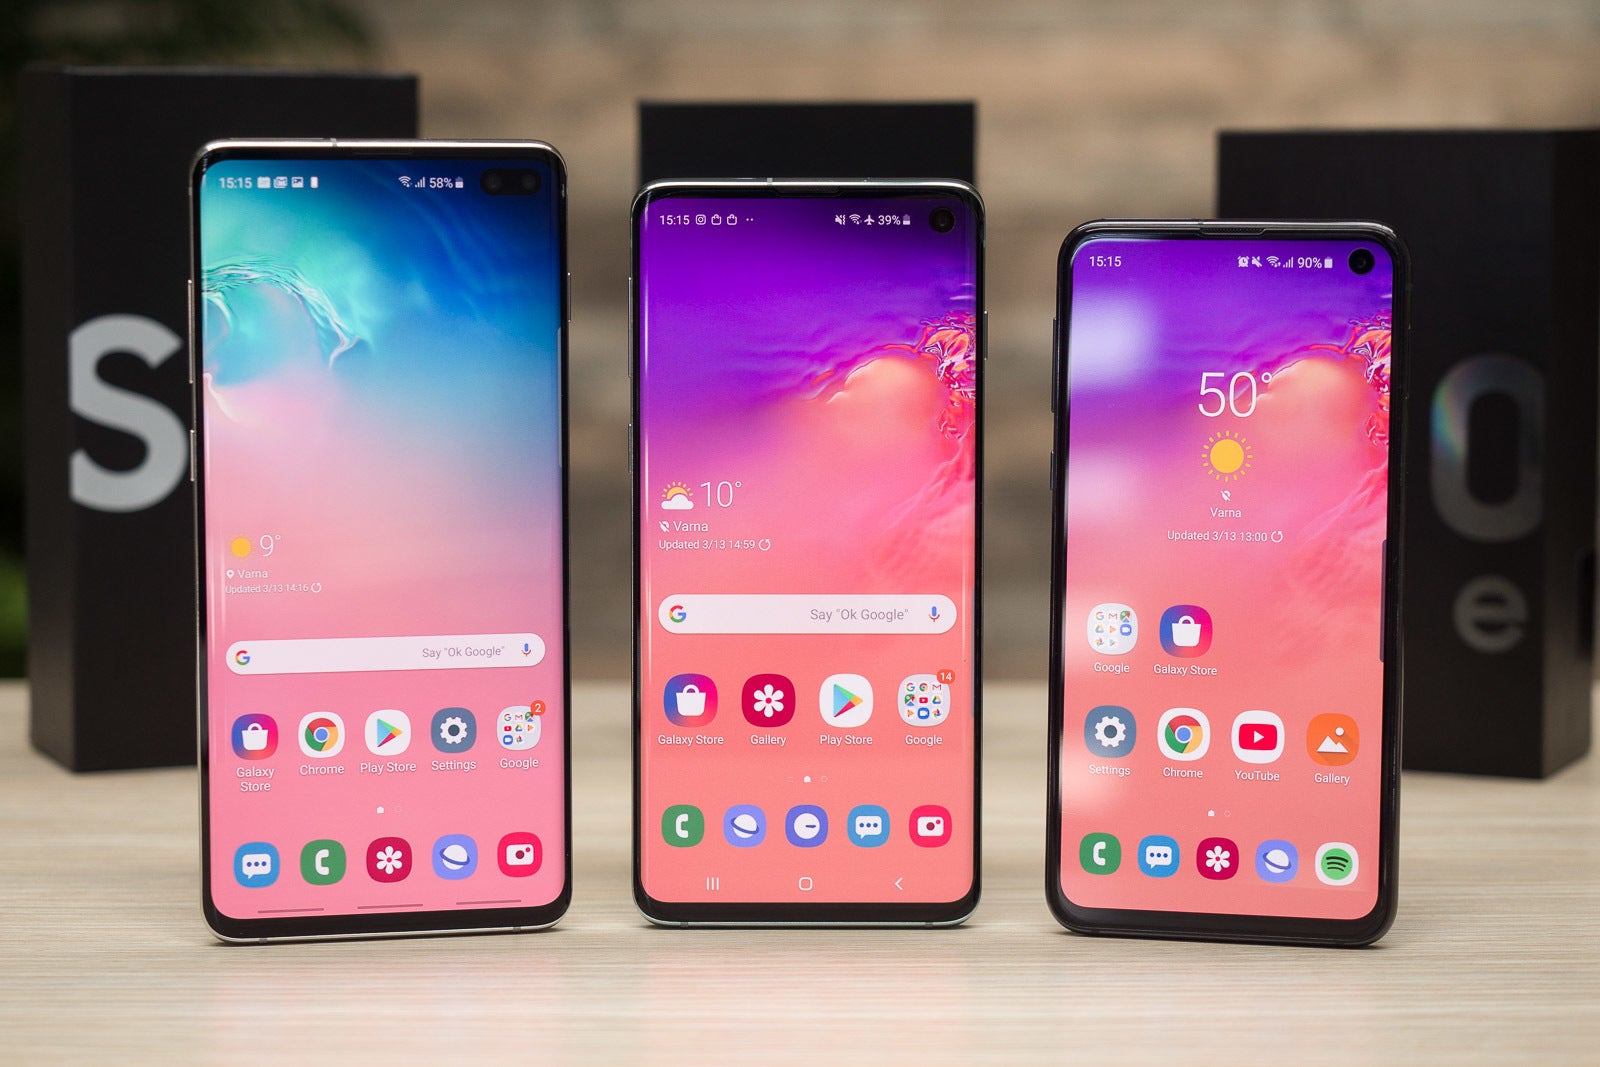 The Samsung Galaxy S10 series - The Galaxy S10 is hugely outperforming the Galaxy S9 in yet another market